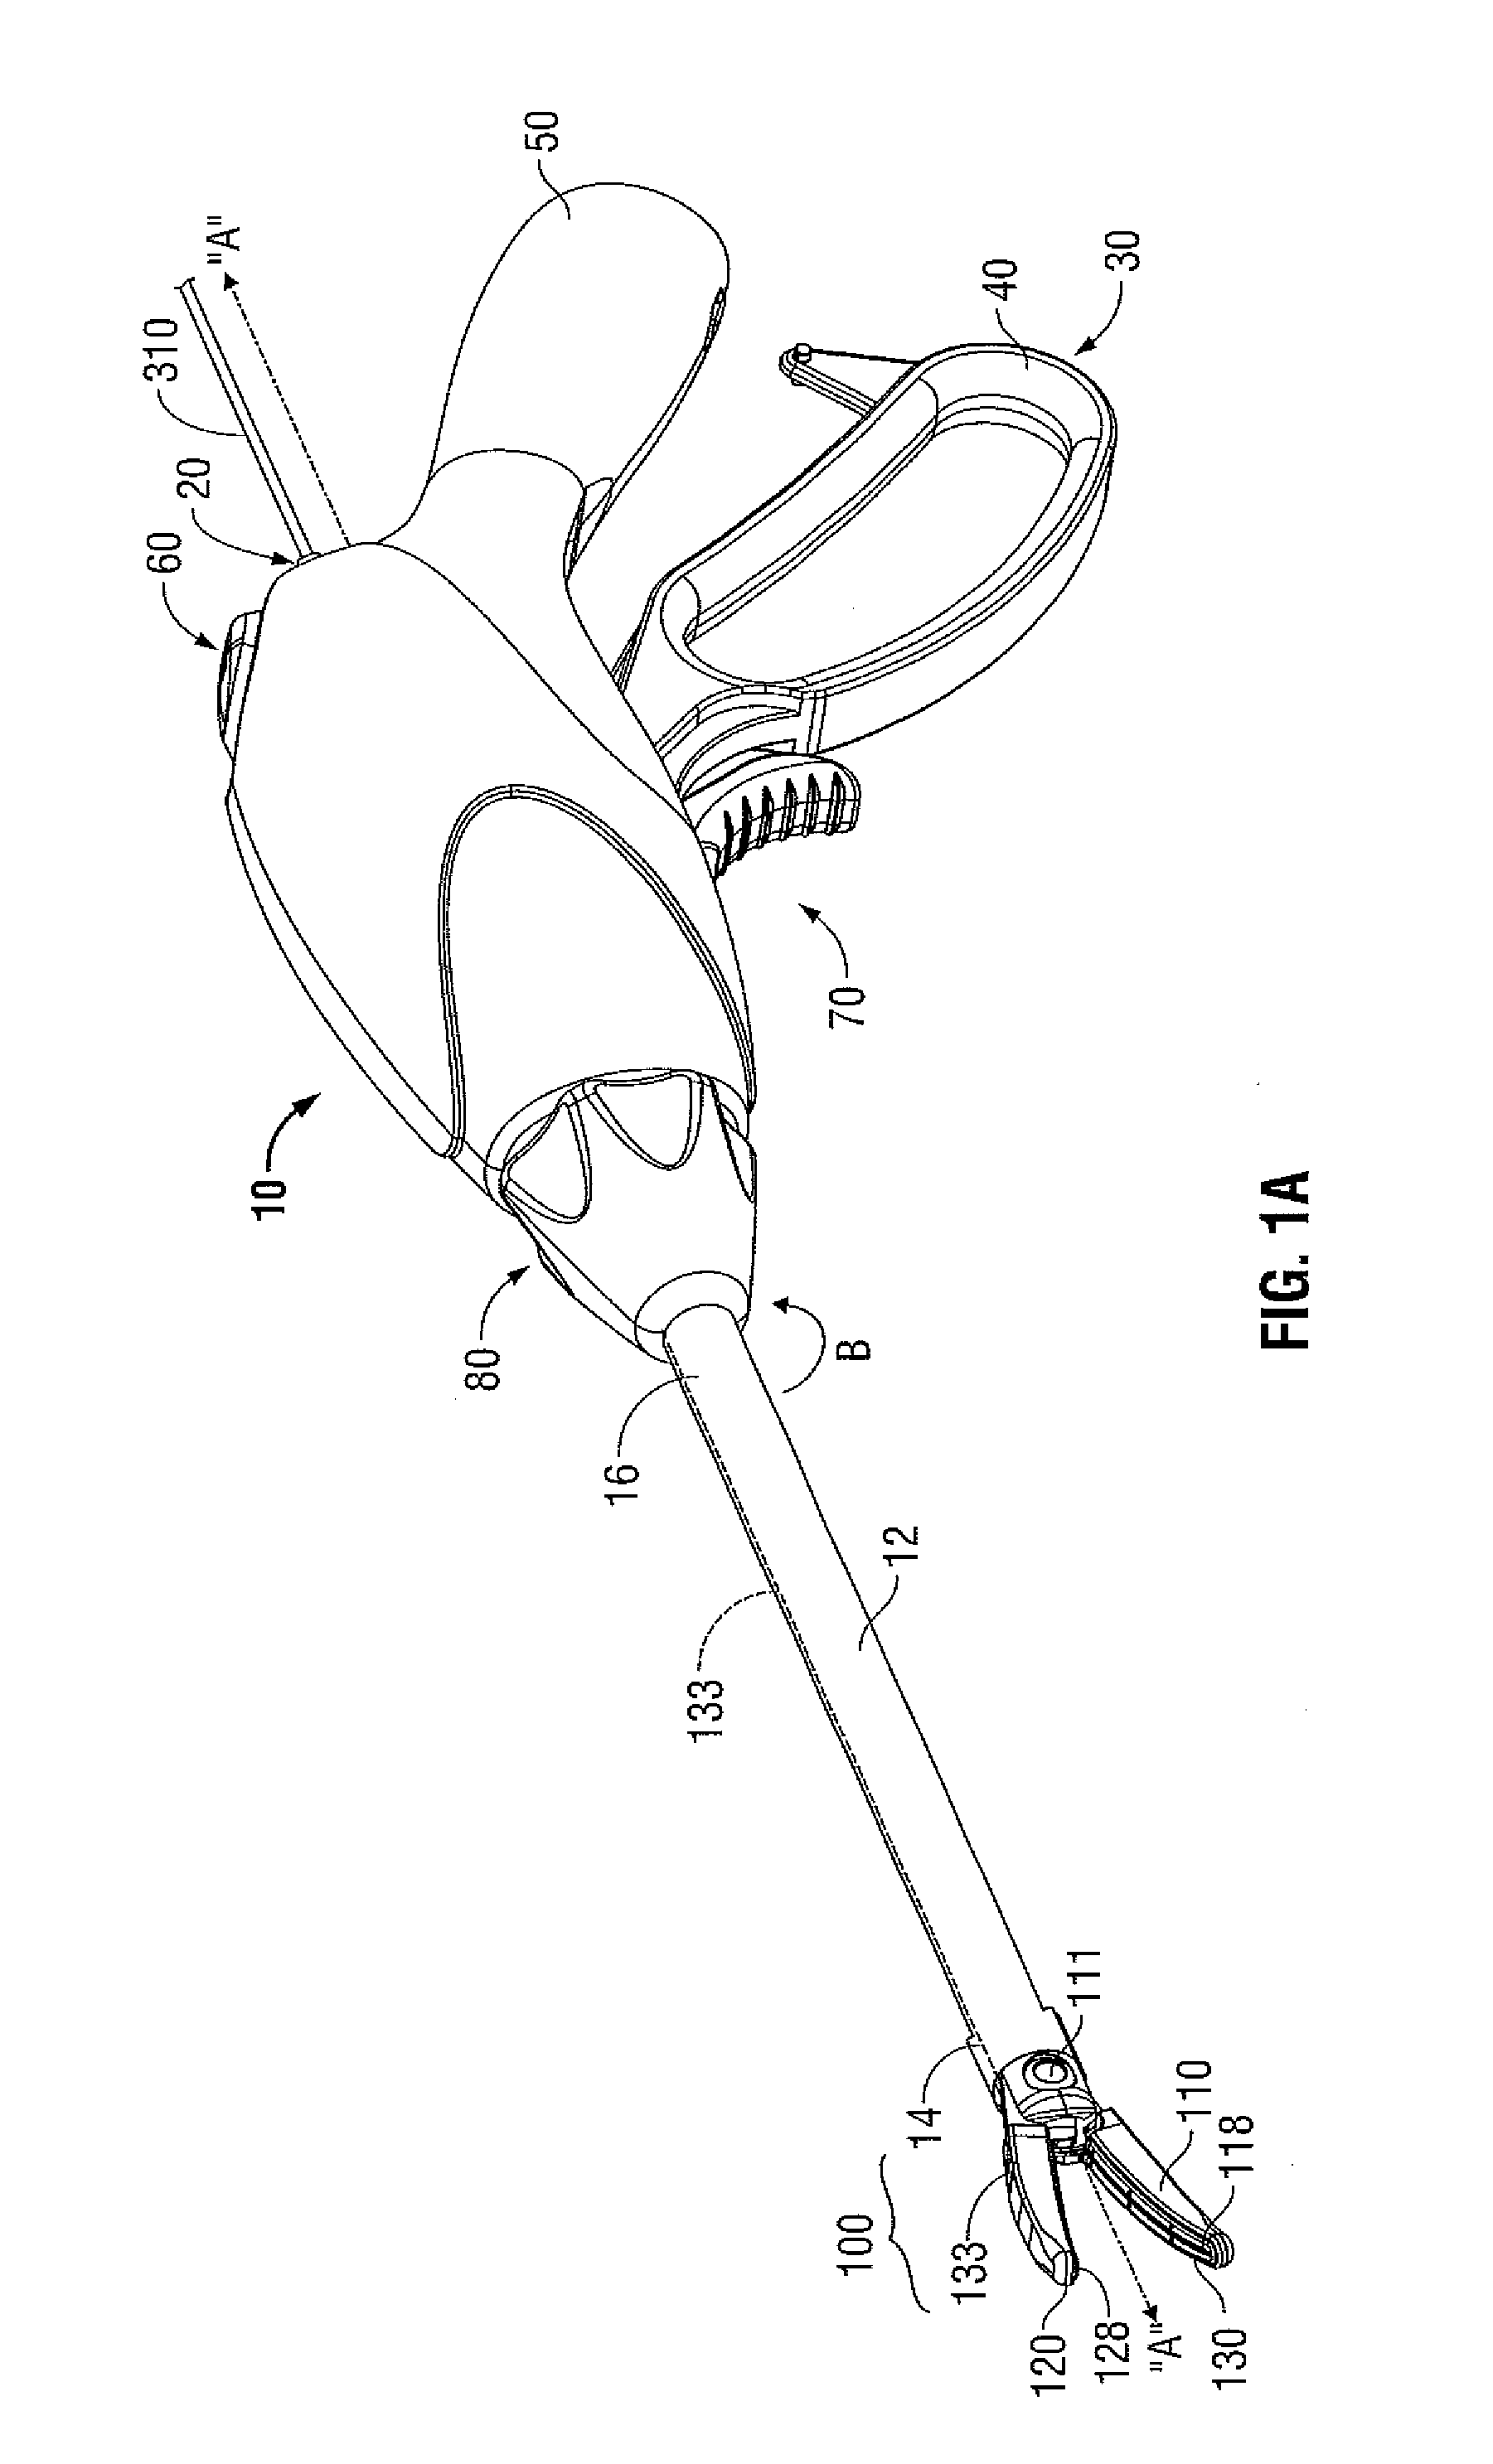 Apparatus and Method for Using Augmented Reality Vision System in Surgical Procedures